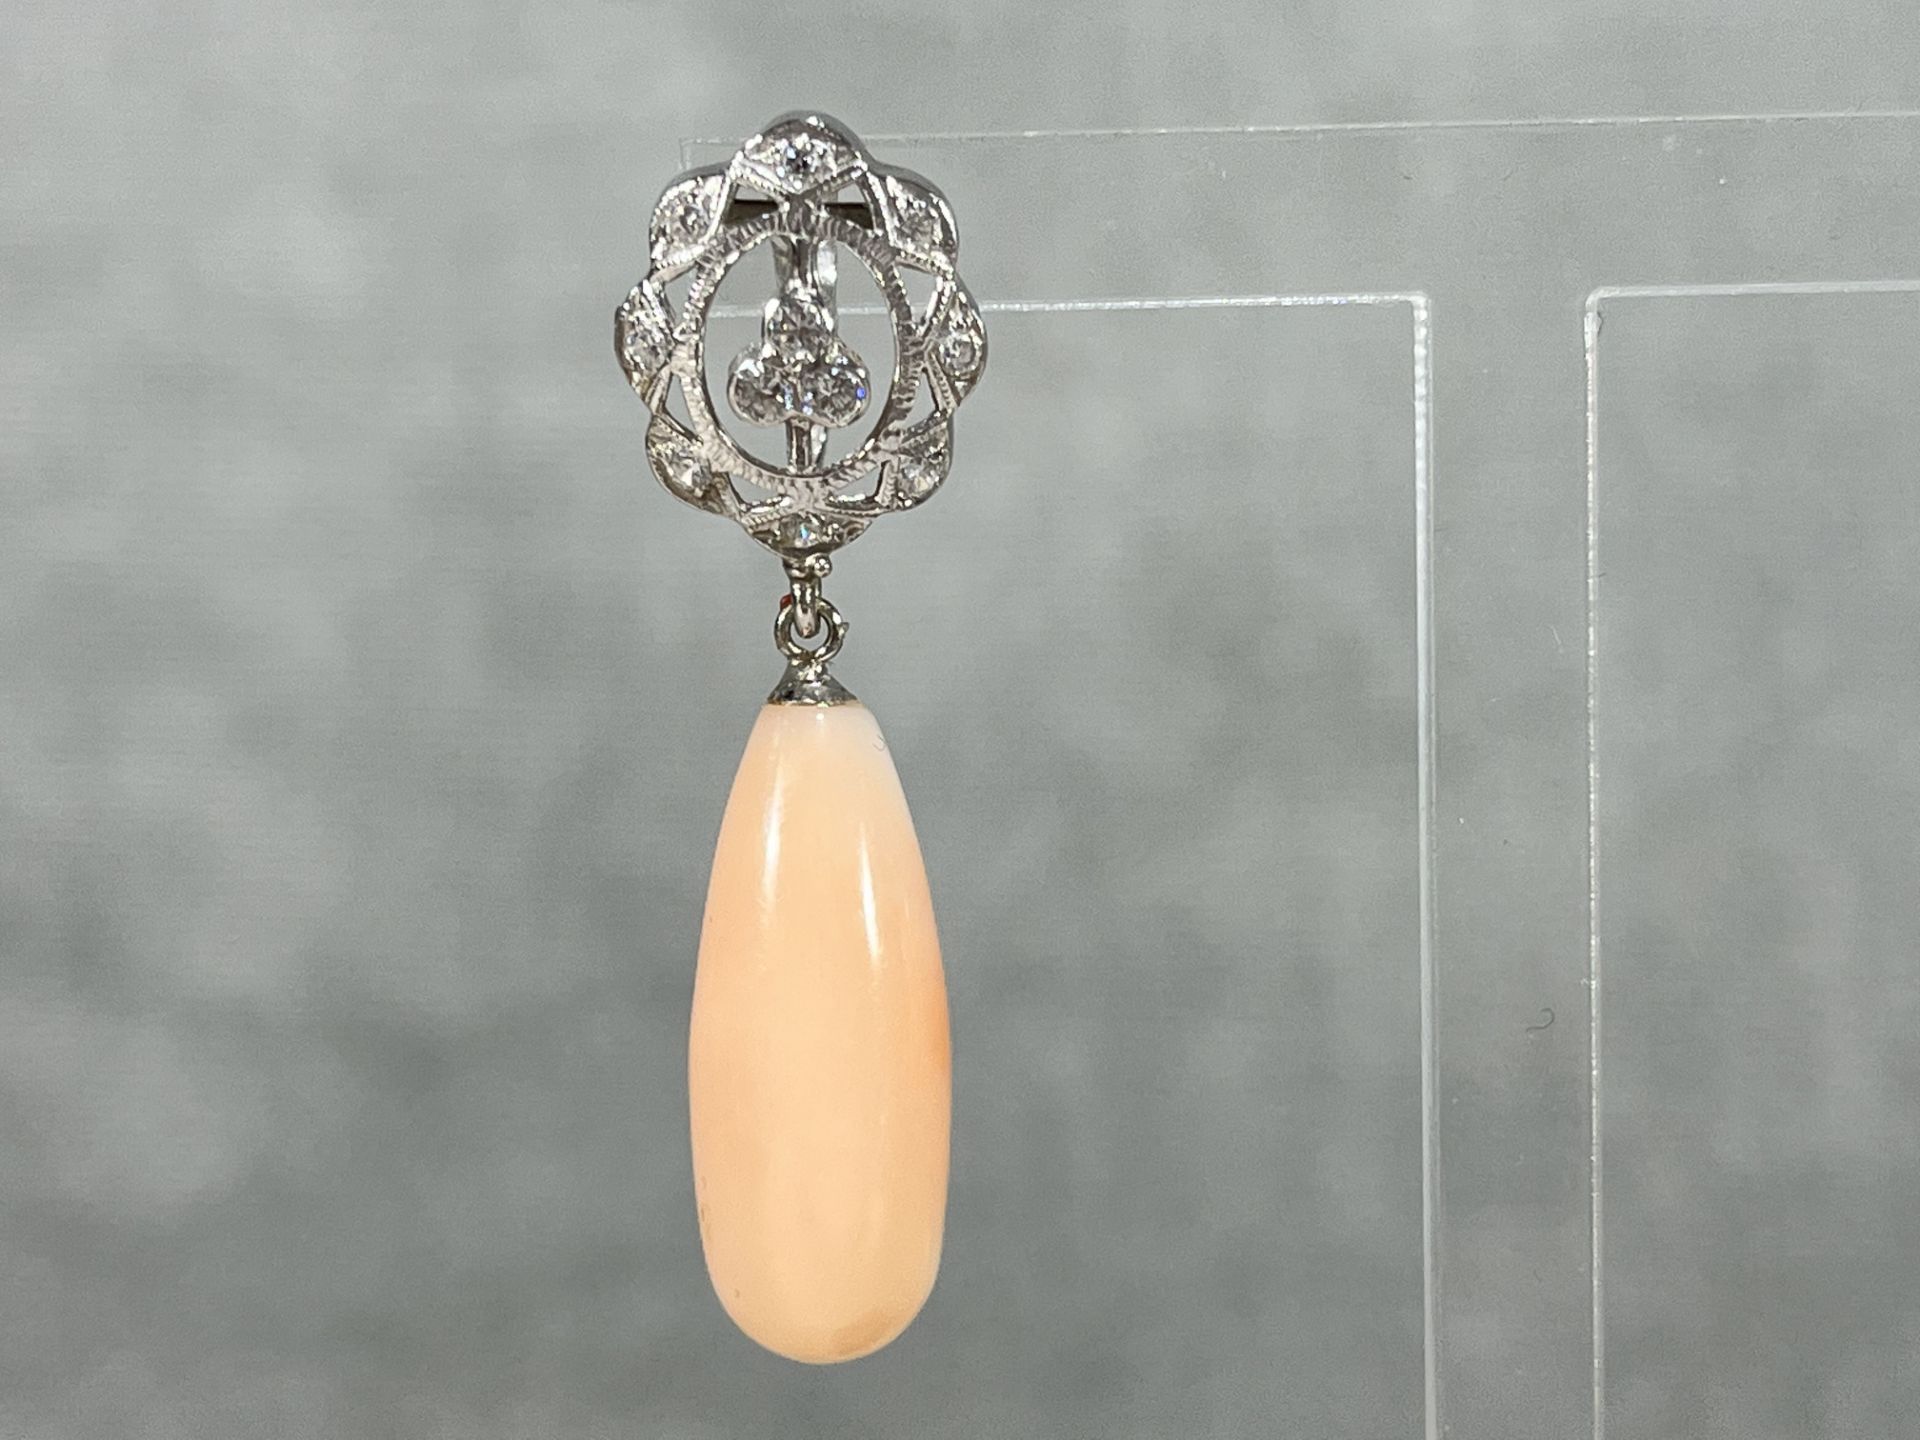 Pair of angelskin coral and 18k white gold earrings - Image 2 of 4